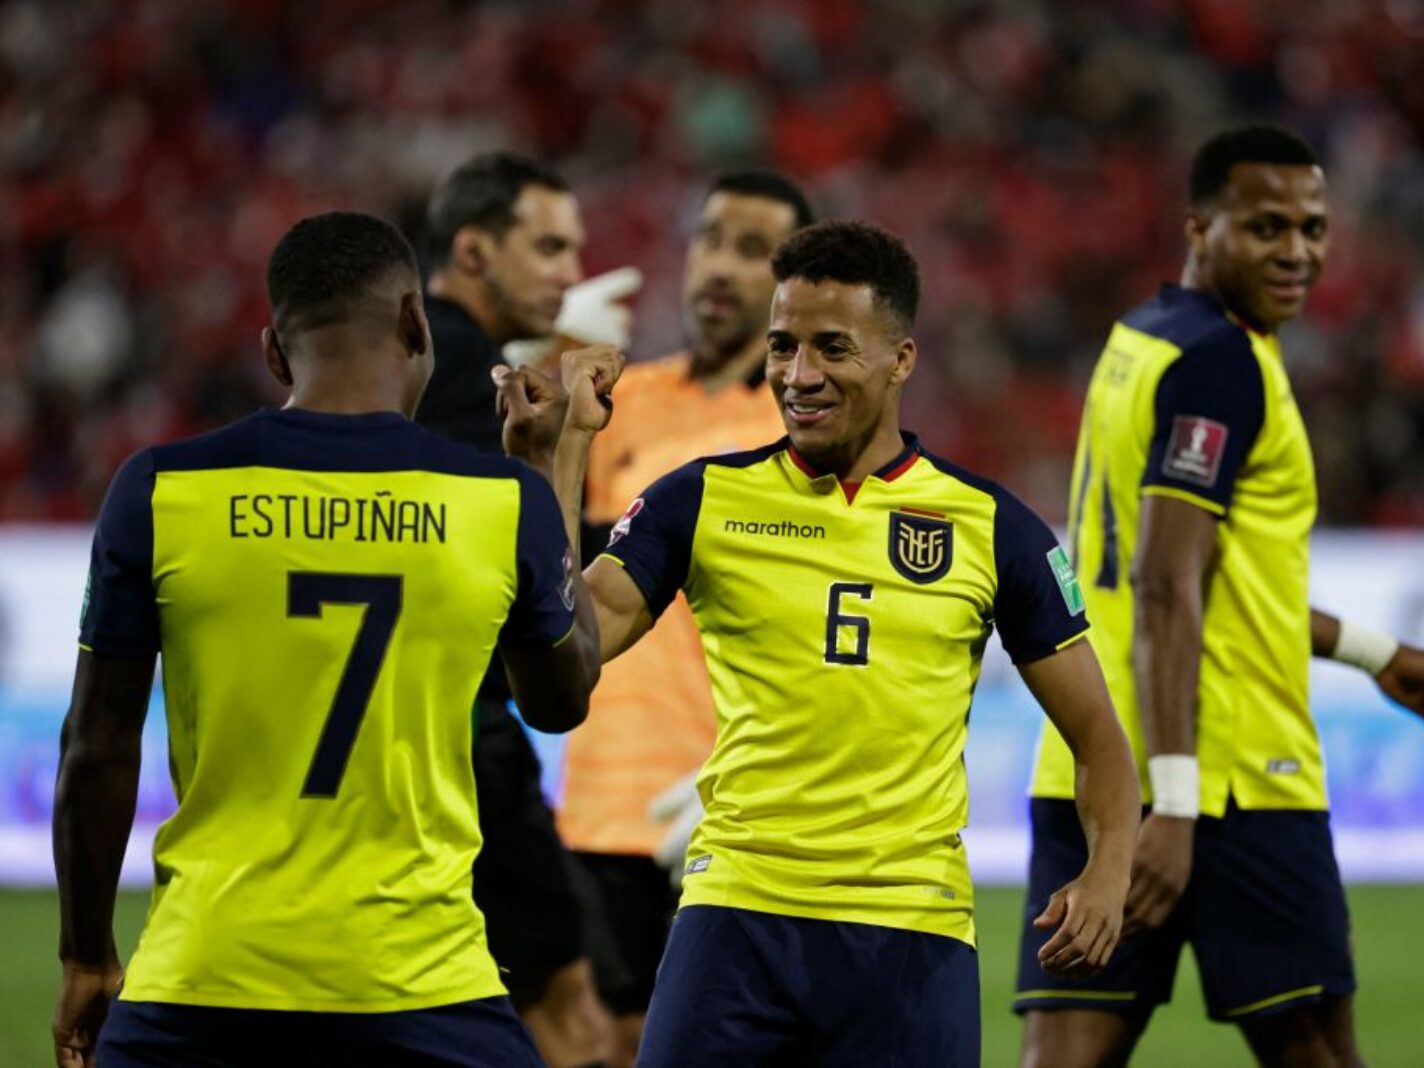 Could Ecuador Be Disqualified from the World Cup? — FIFA Opens Disciplinary Procedure